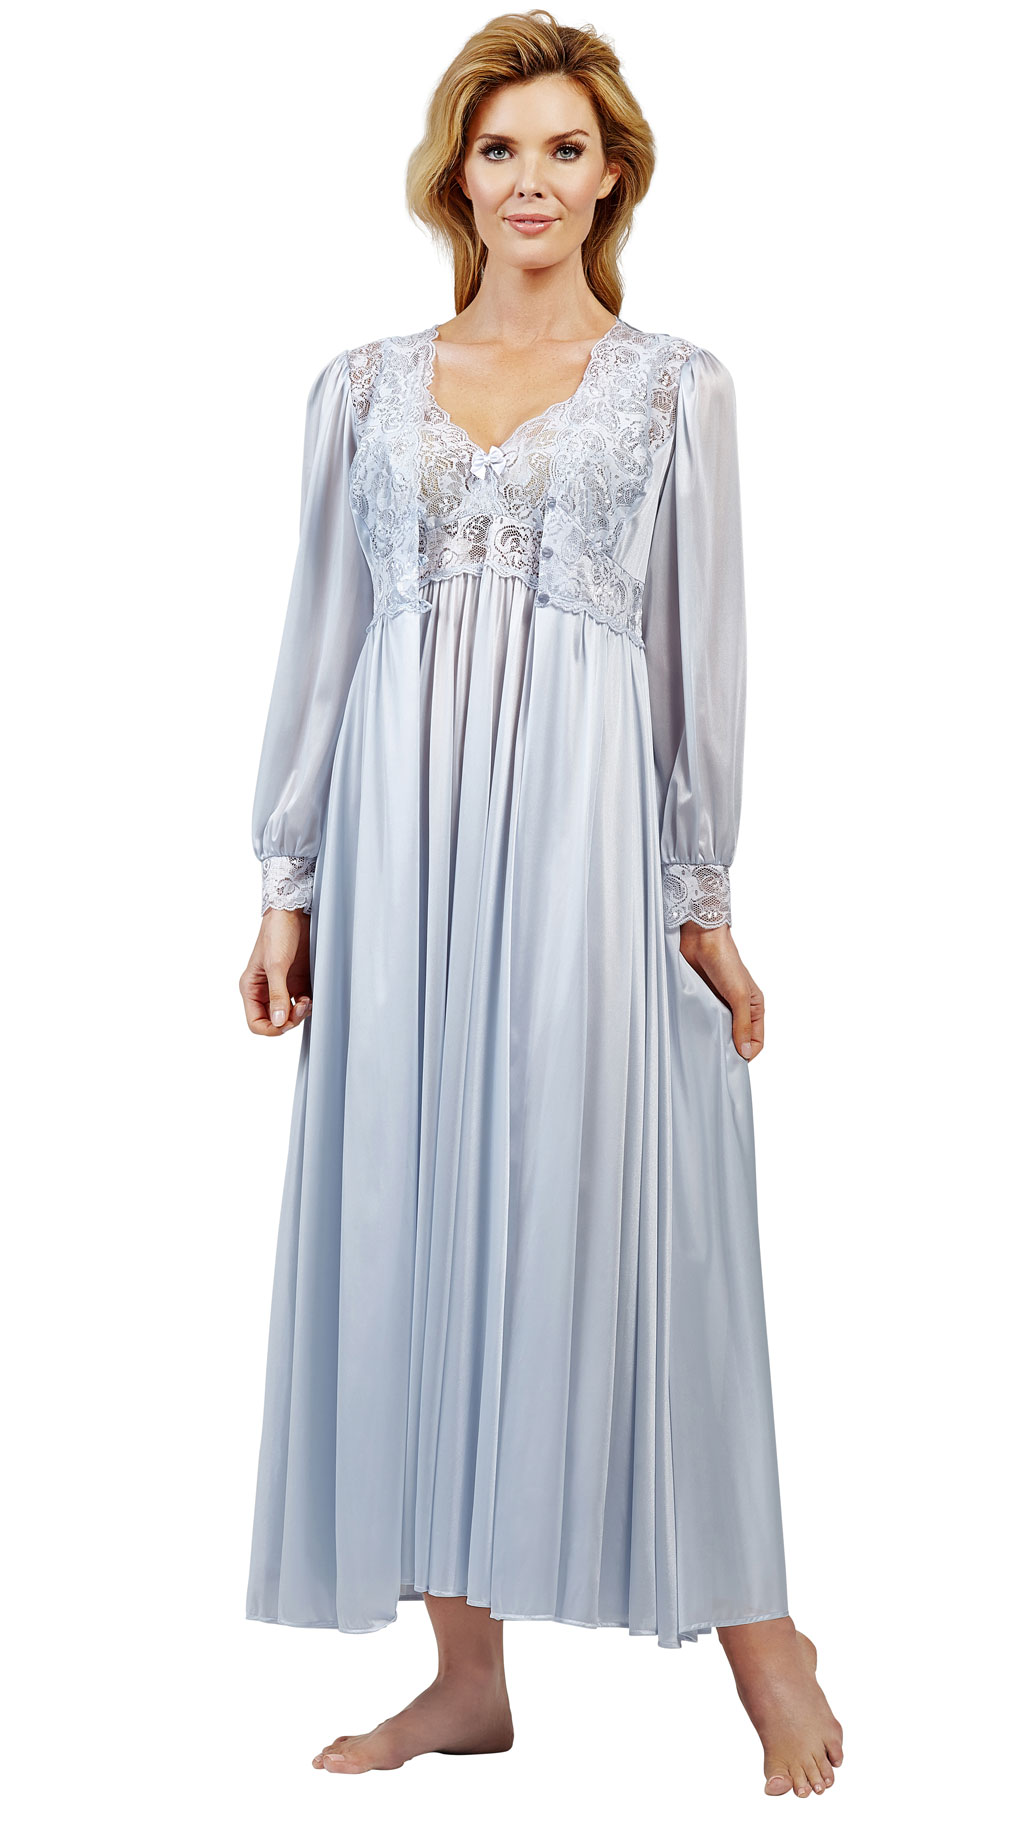 nightgown and robe sets